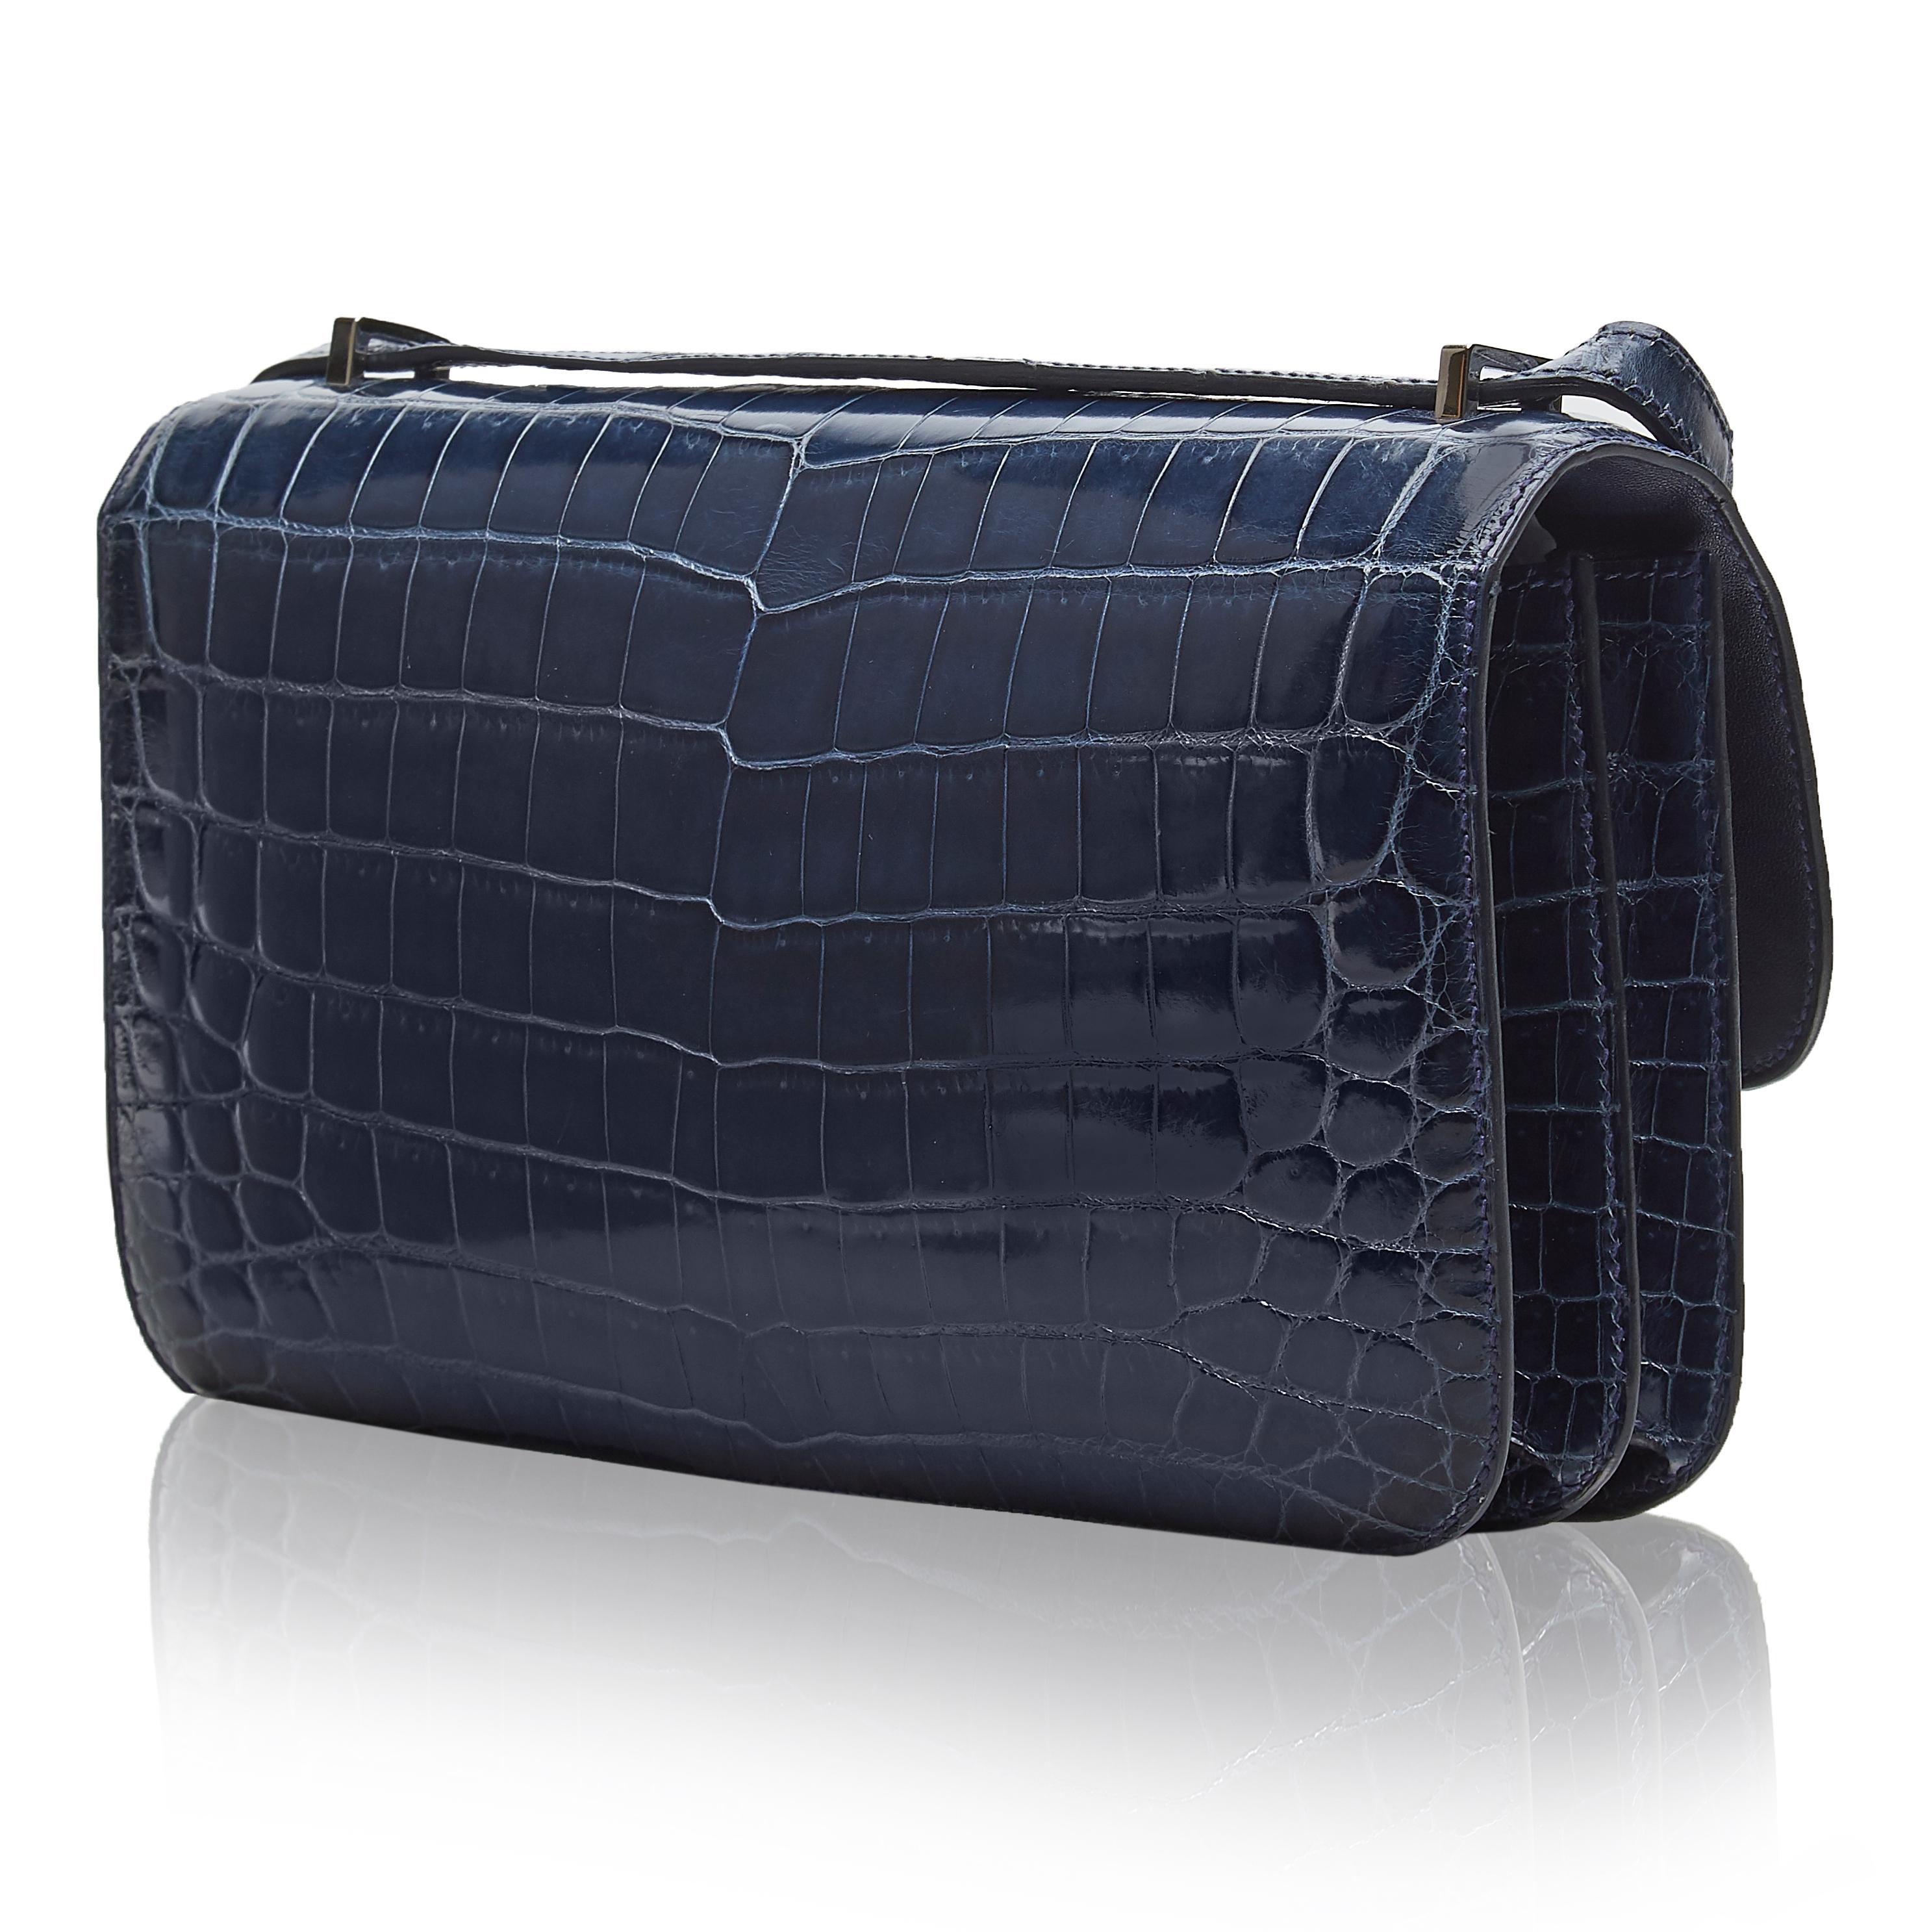 This 25cm Constance Elan shoulder bag from Hermès was meticulously crafted in France from a highly precious Niloticus crocodile in a deep shade of navy blue. Offset with silver-tone palladium-plated hardware, its slender body is adorned with the